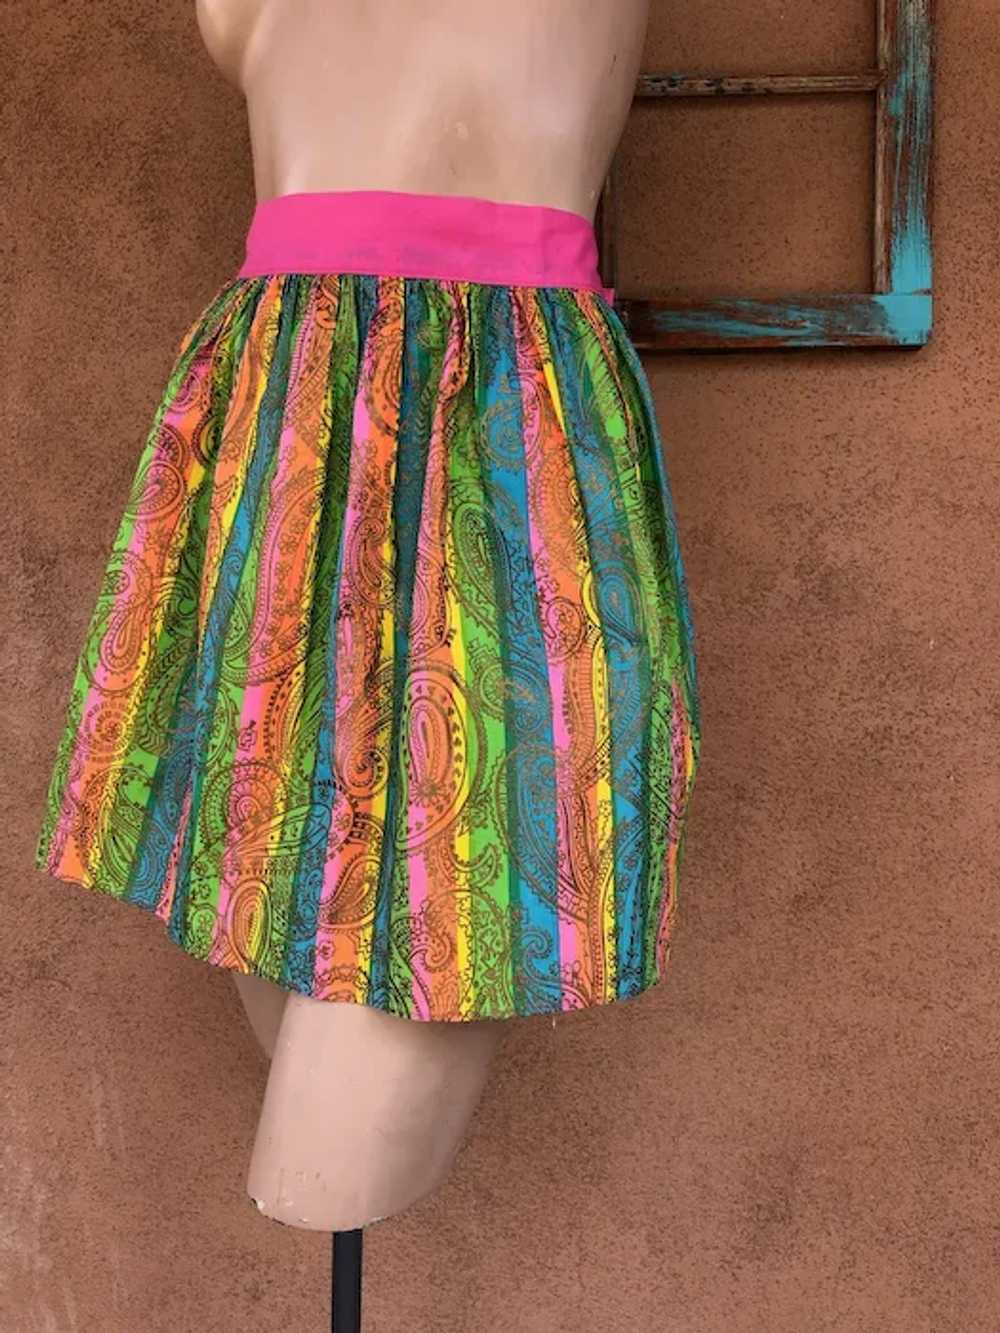 1960s Mod Psychedelic Striped Cotton Apron - image 3